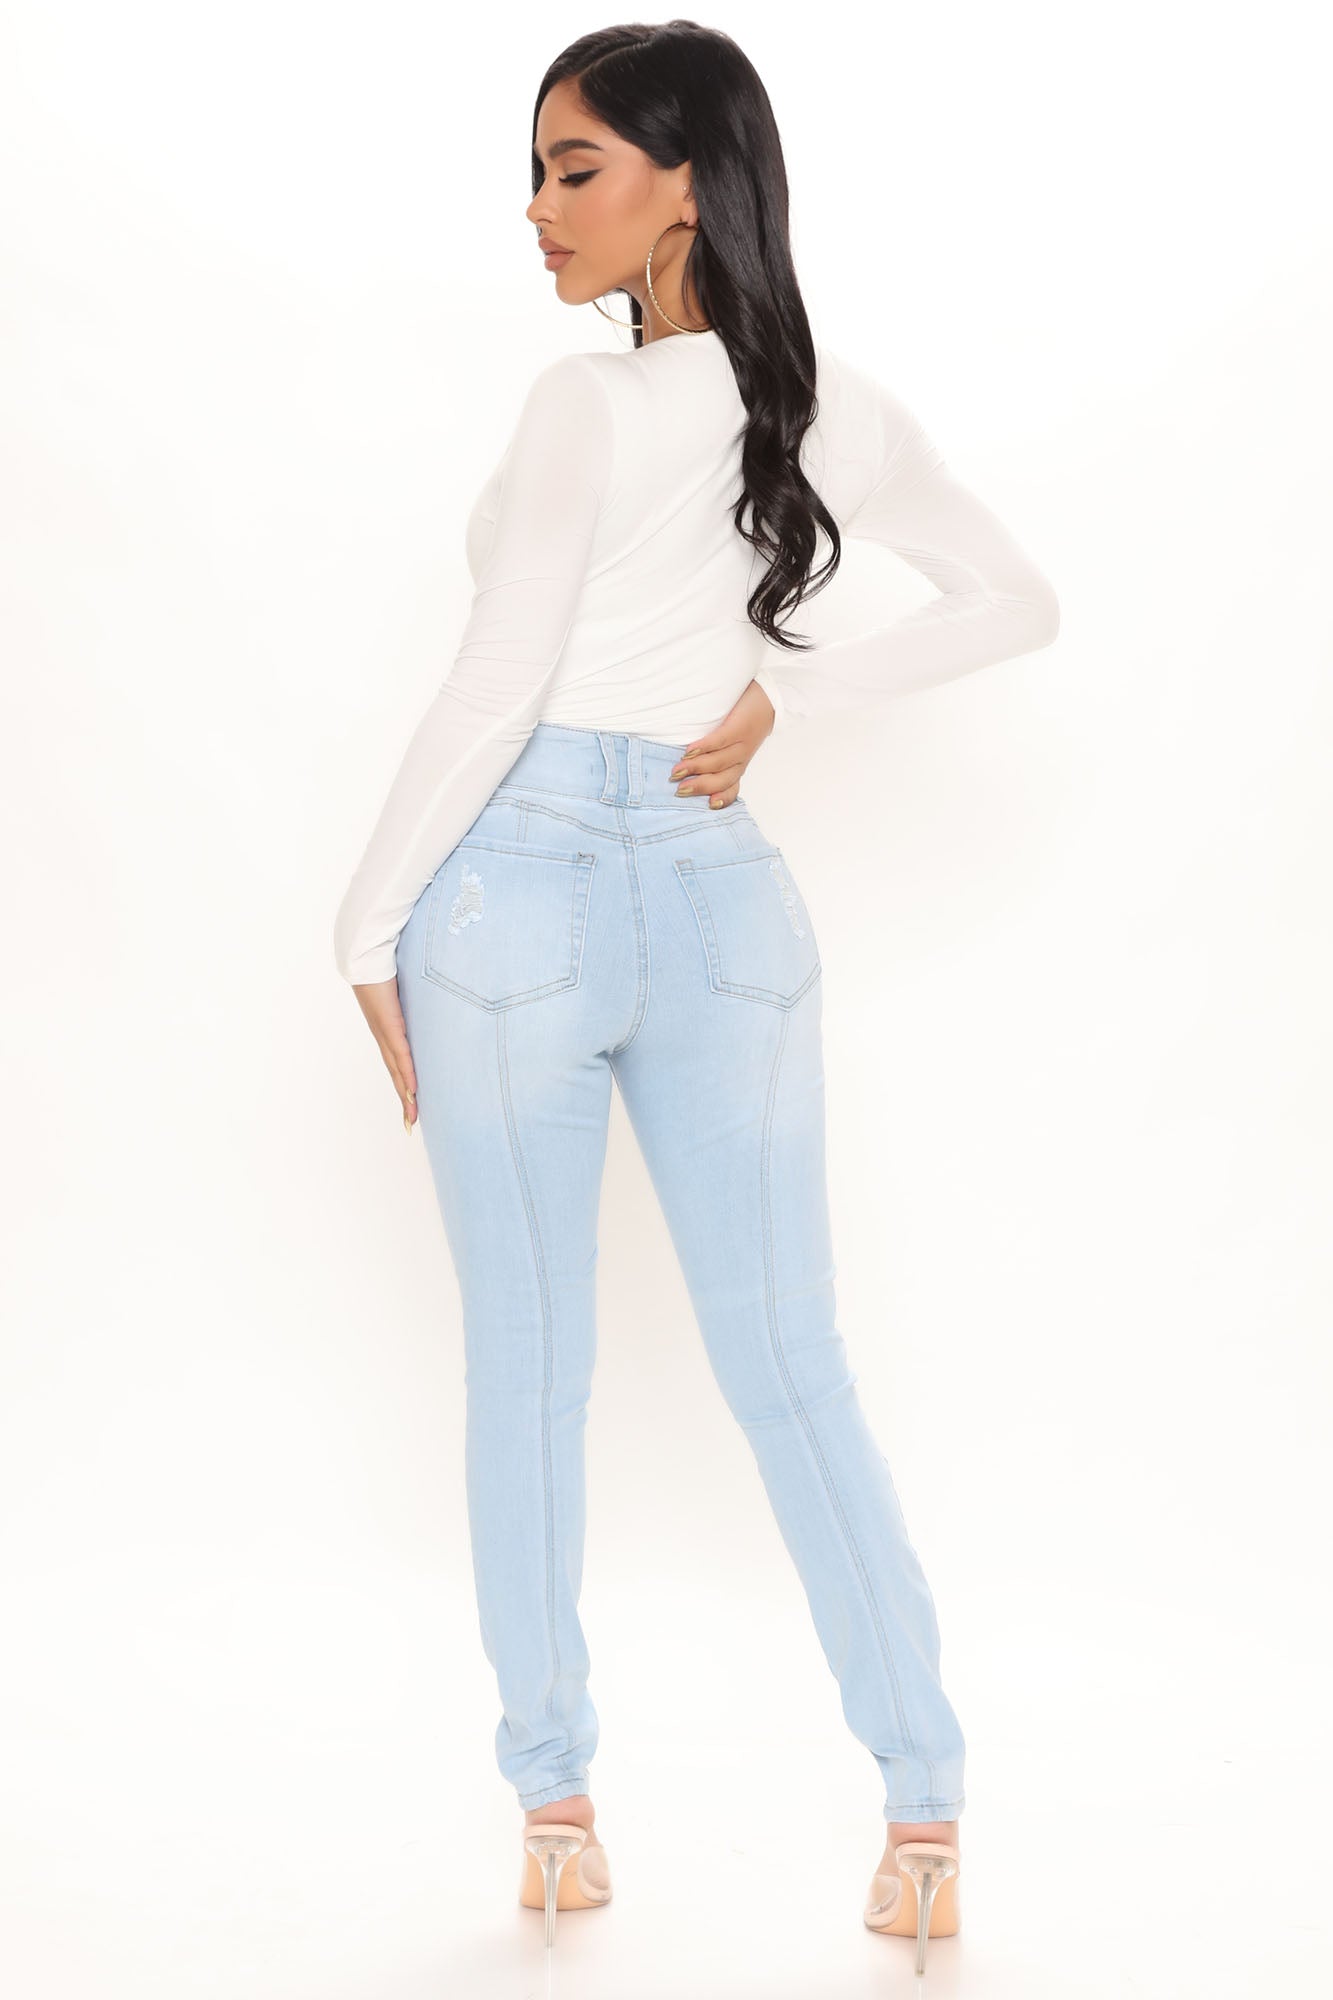 On Edge Ripped Skinny Jeans - Light Blue Wash